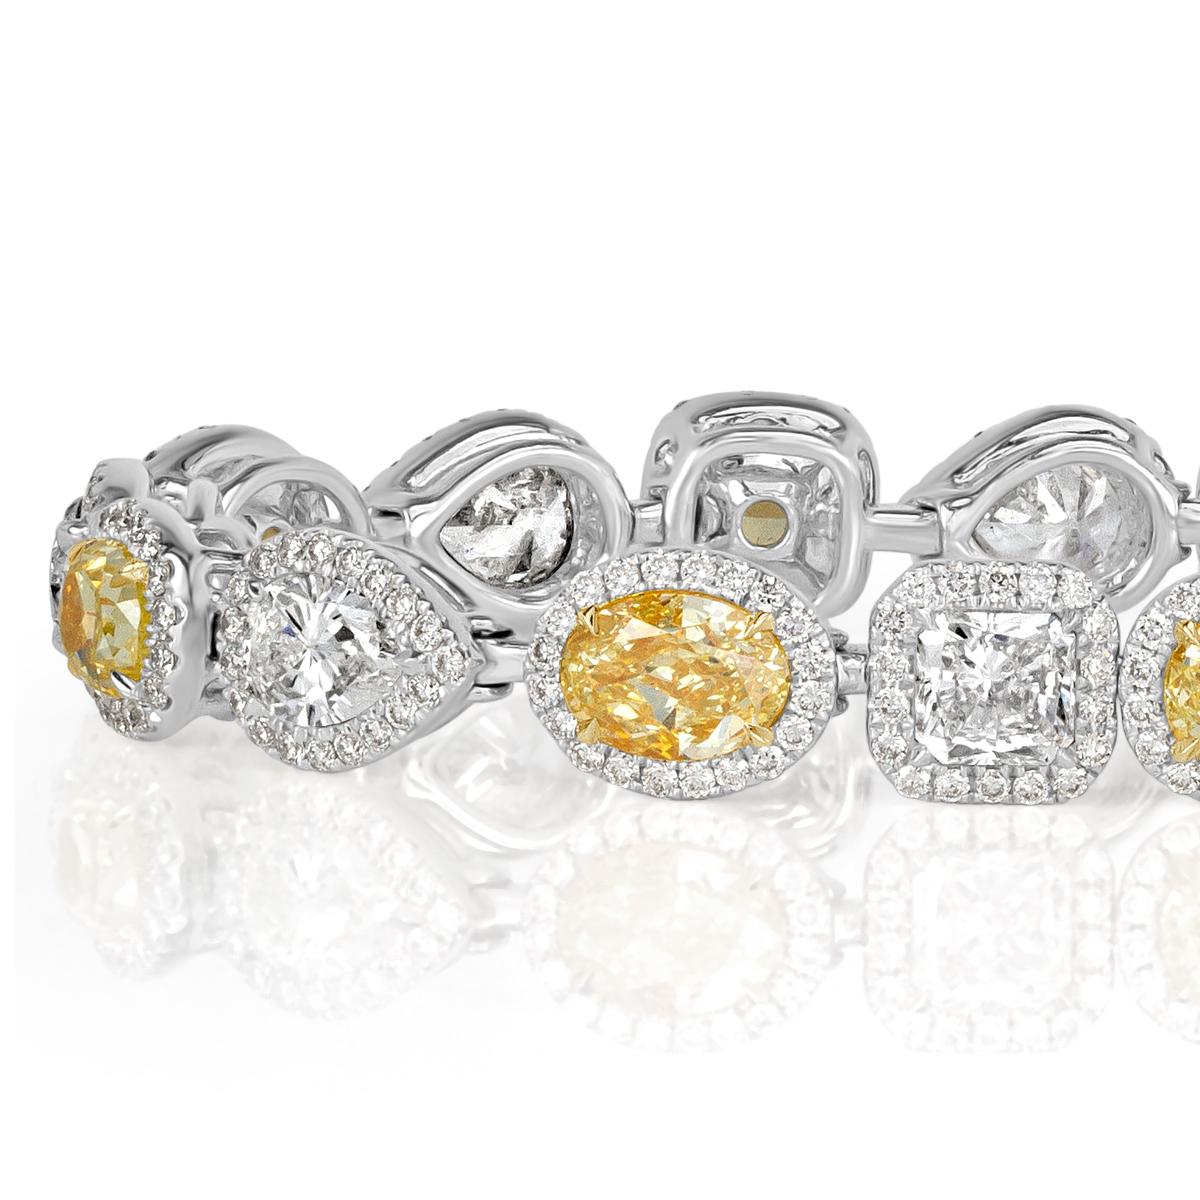 This superb diamond bracelet showcases an exquisite fringe of fancy yellow and white cushion, oval, round and pear shaped diamonds. They are each complimented by a dainty micro pavé halo. The diamonds total 10.00ct in weight and are graded at E-F,